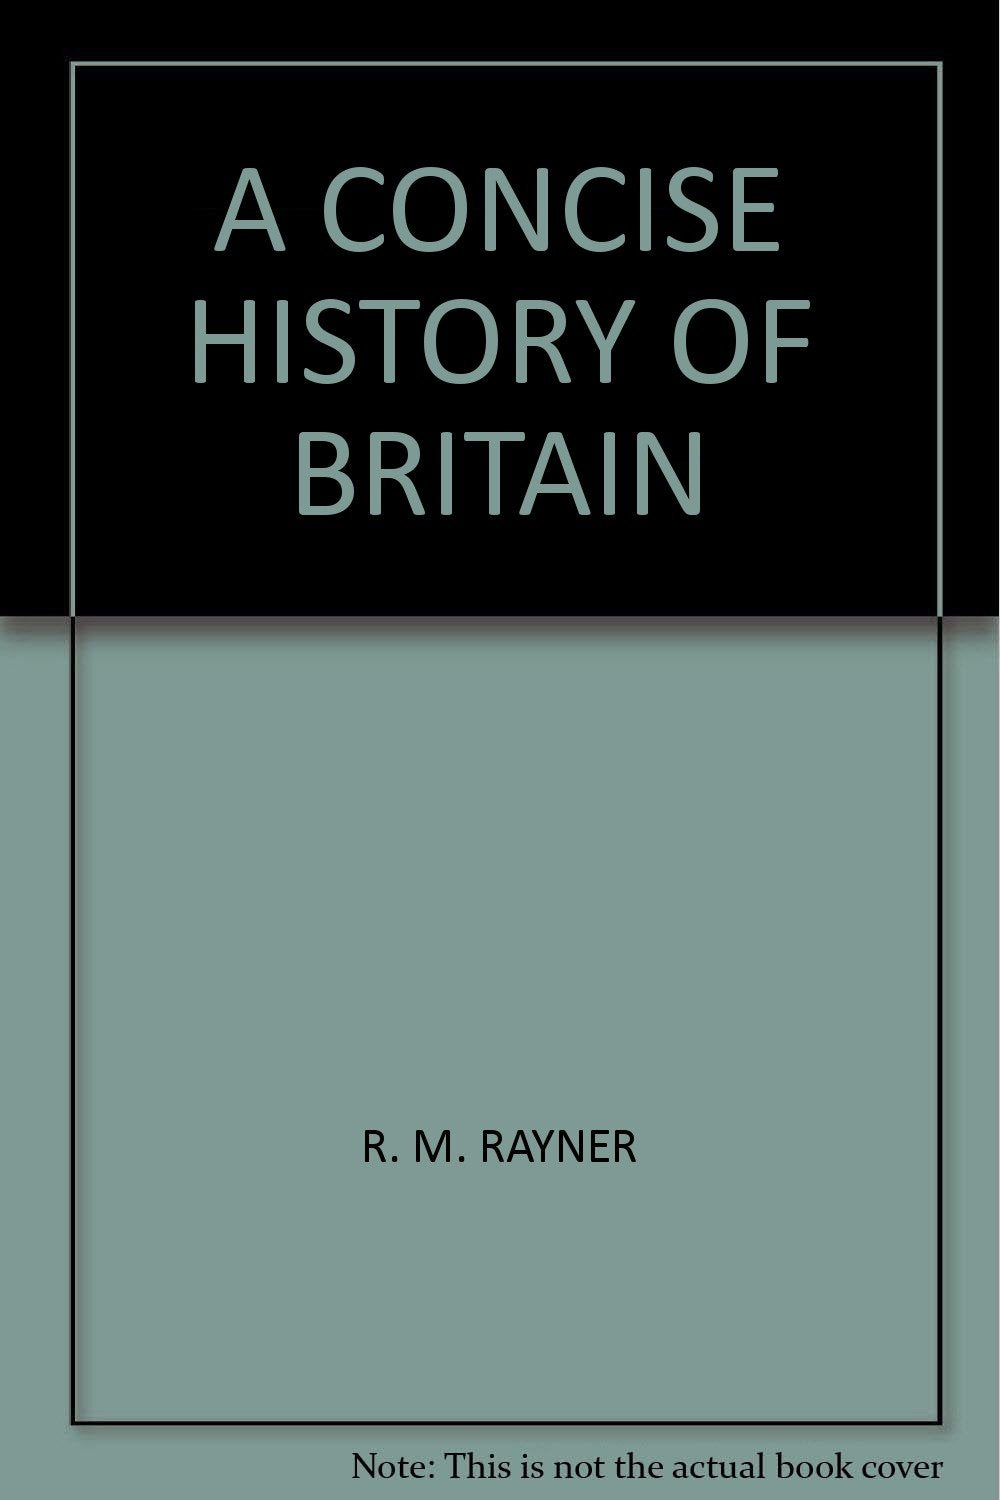 A CONCISE HISTORY OF BRITAIN [Hardcover] R. M. RAYNER